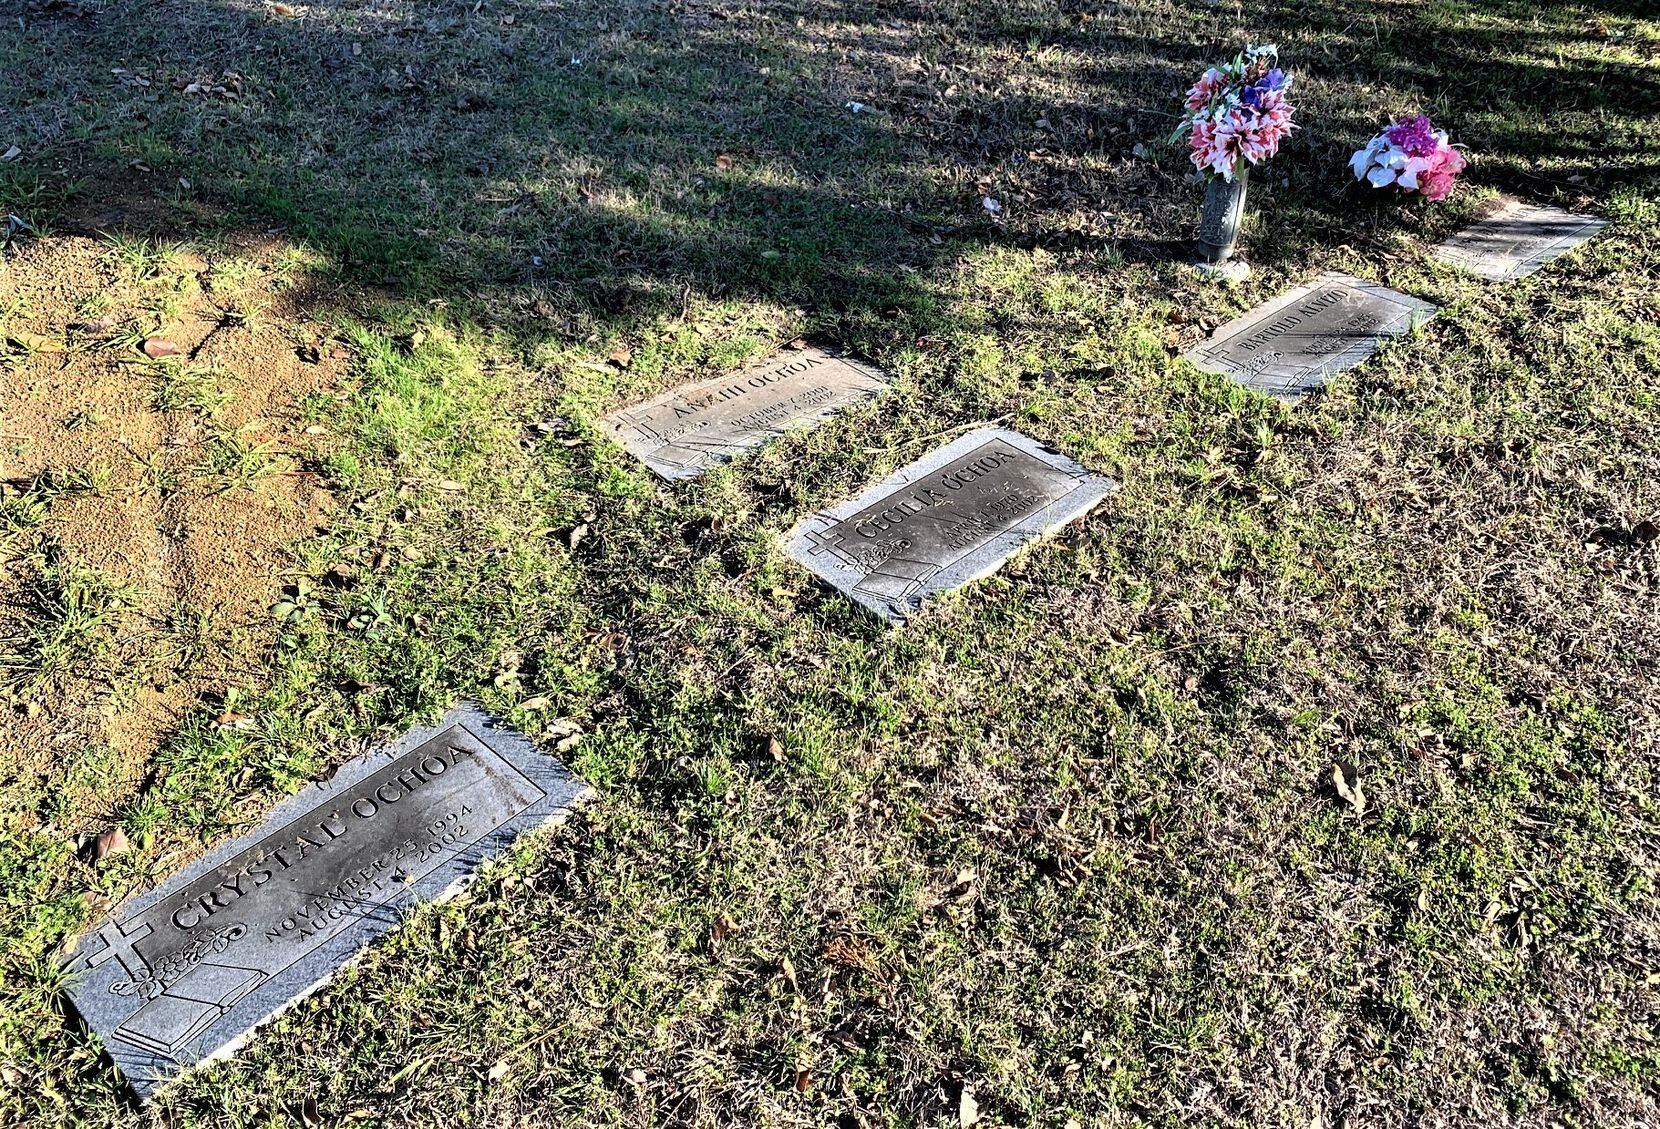 The five family members who were slain by Abel Ochoa are buried at Southland Memorial Park in Grand Prairie.